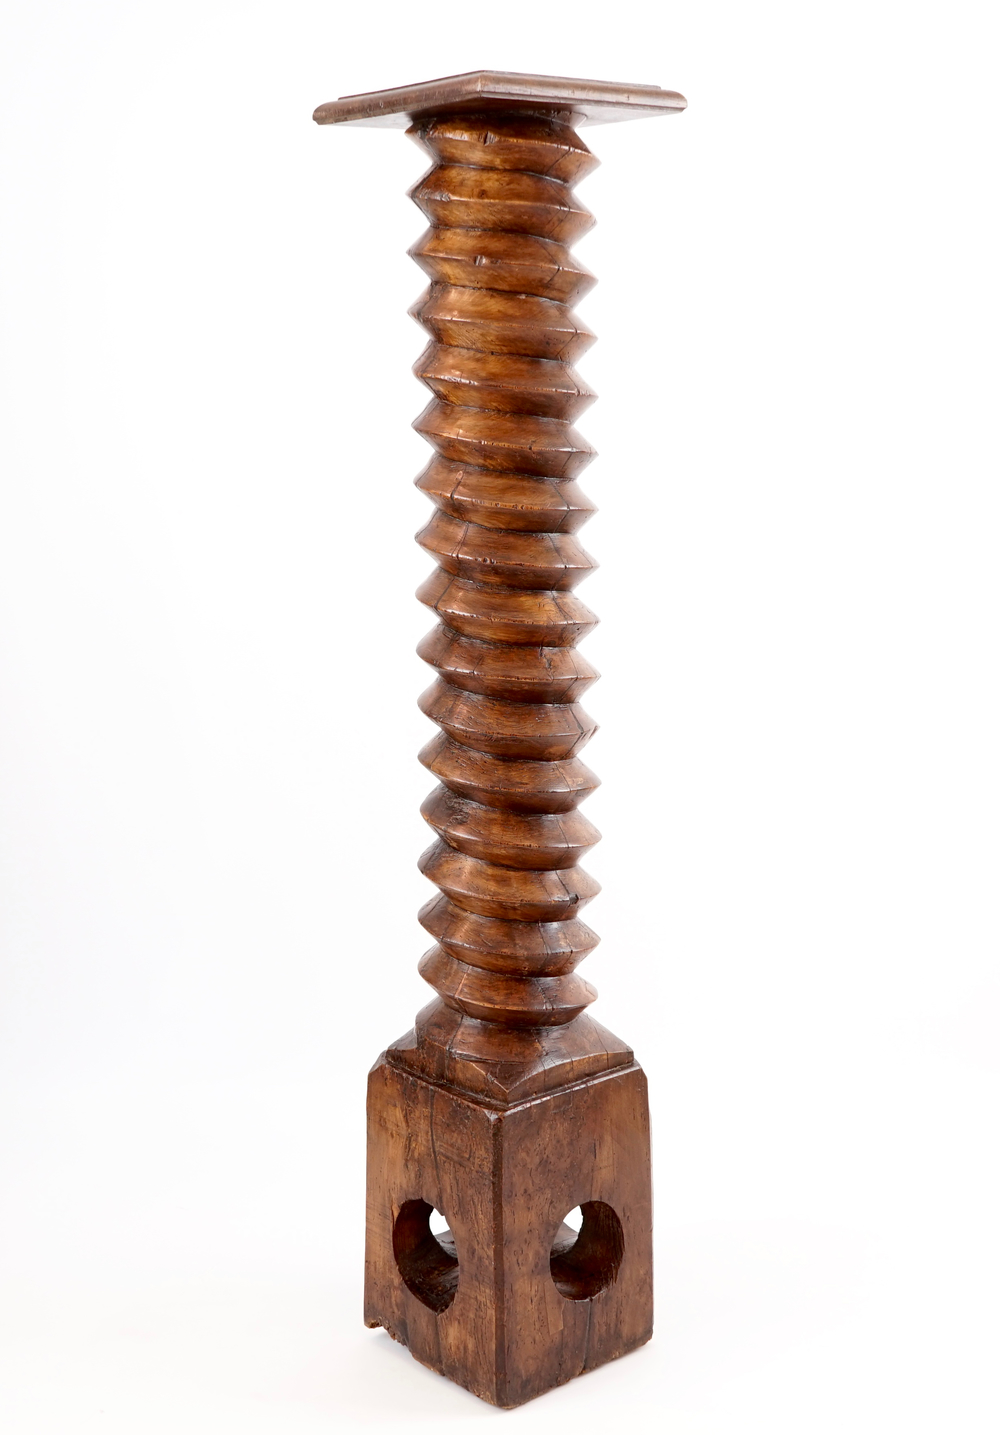 A decorative large wooden industrial screw, 19th C.